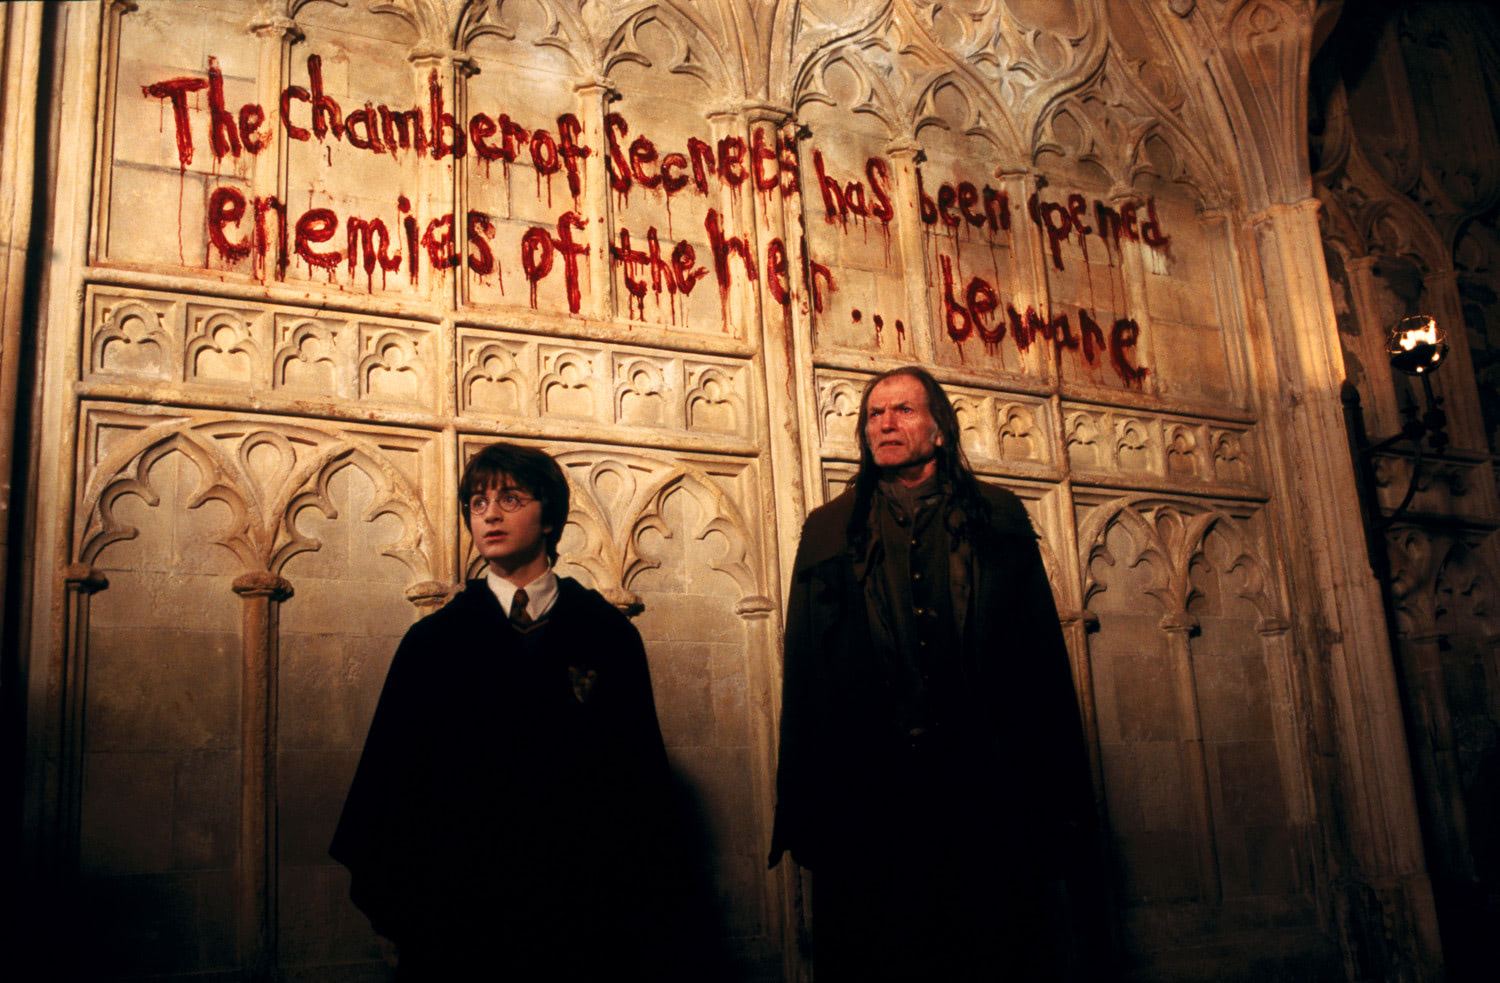 Harry and Filch by the bloodied wall